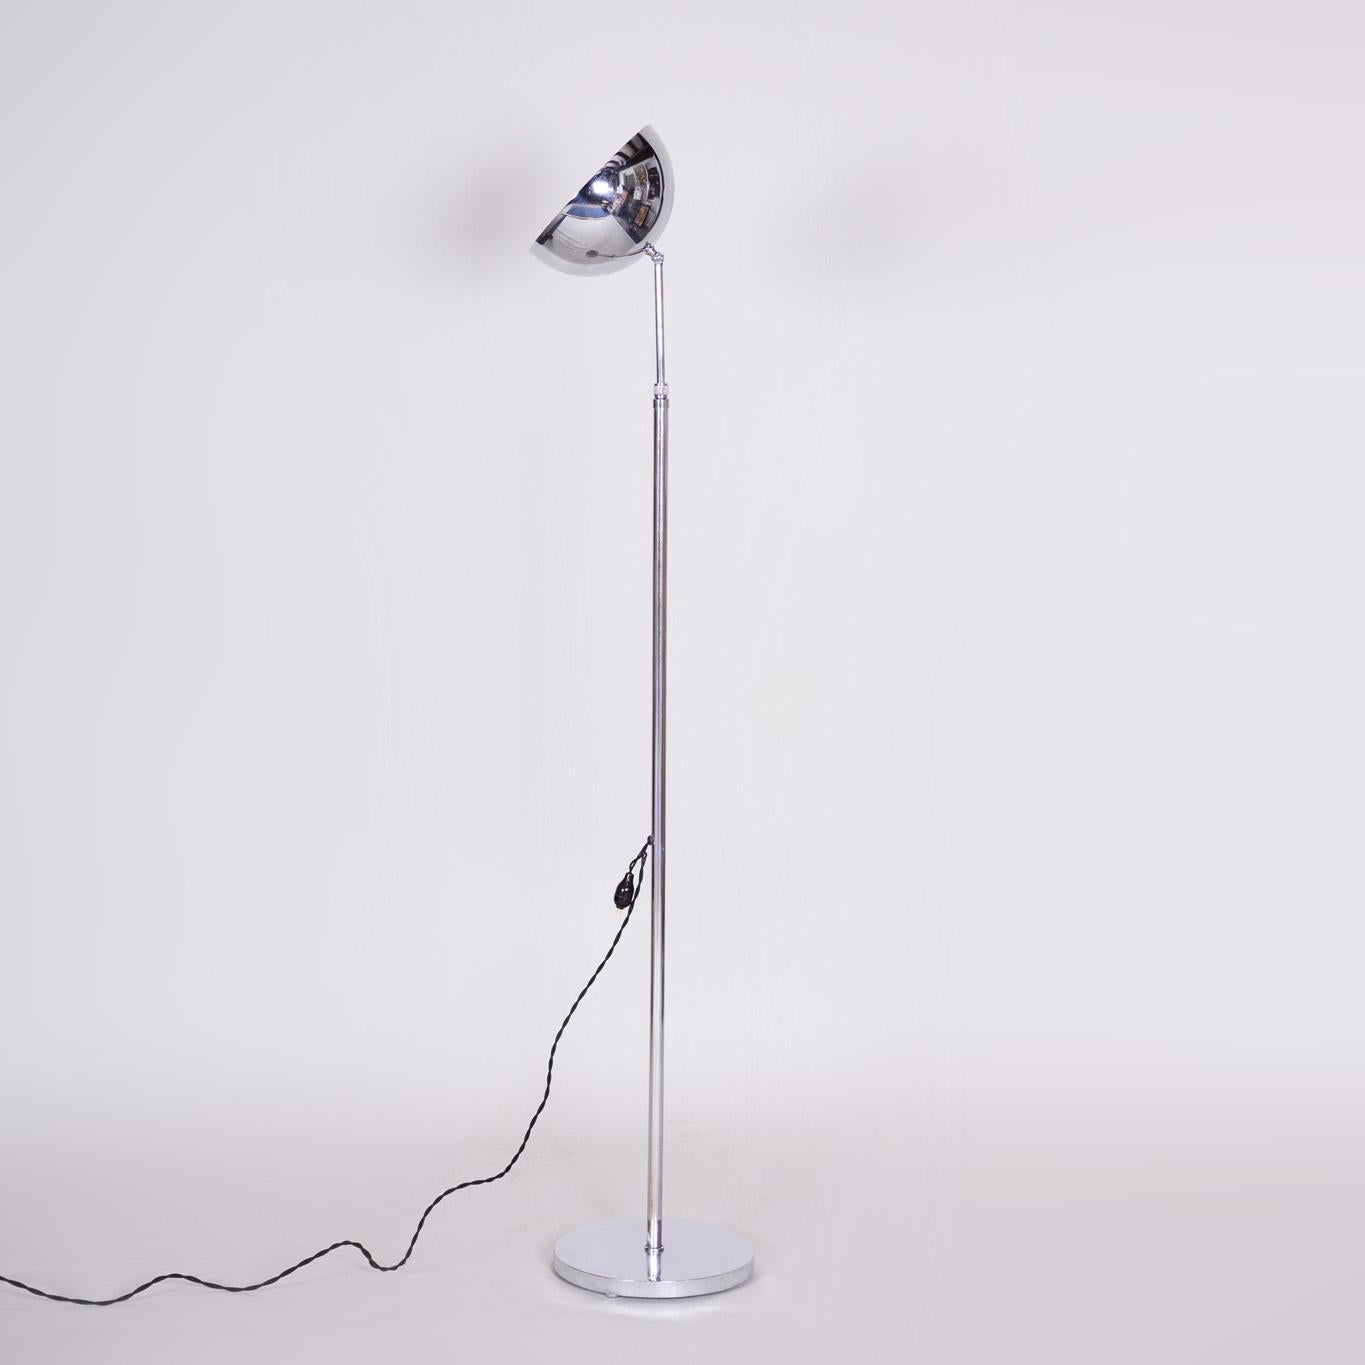 Restored Bauhaus Floor Lamp Made in the 1930s, Made Out of Chrome Plated Steel In Good Condition For Sale In Horomerice, CZ